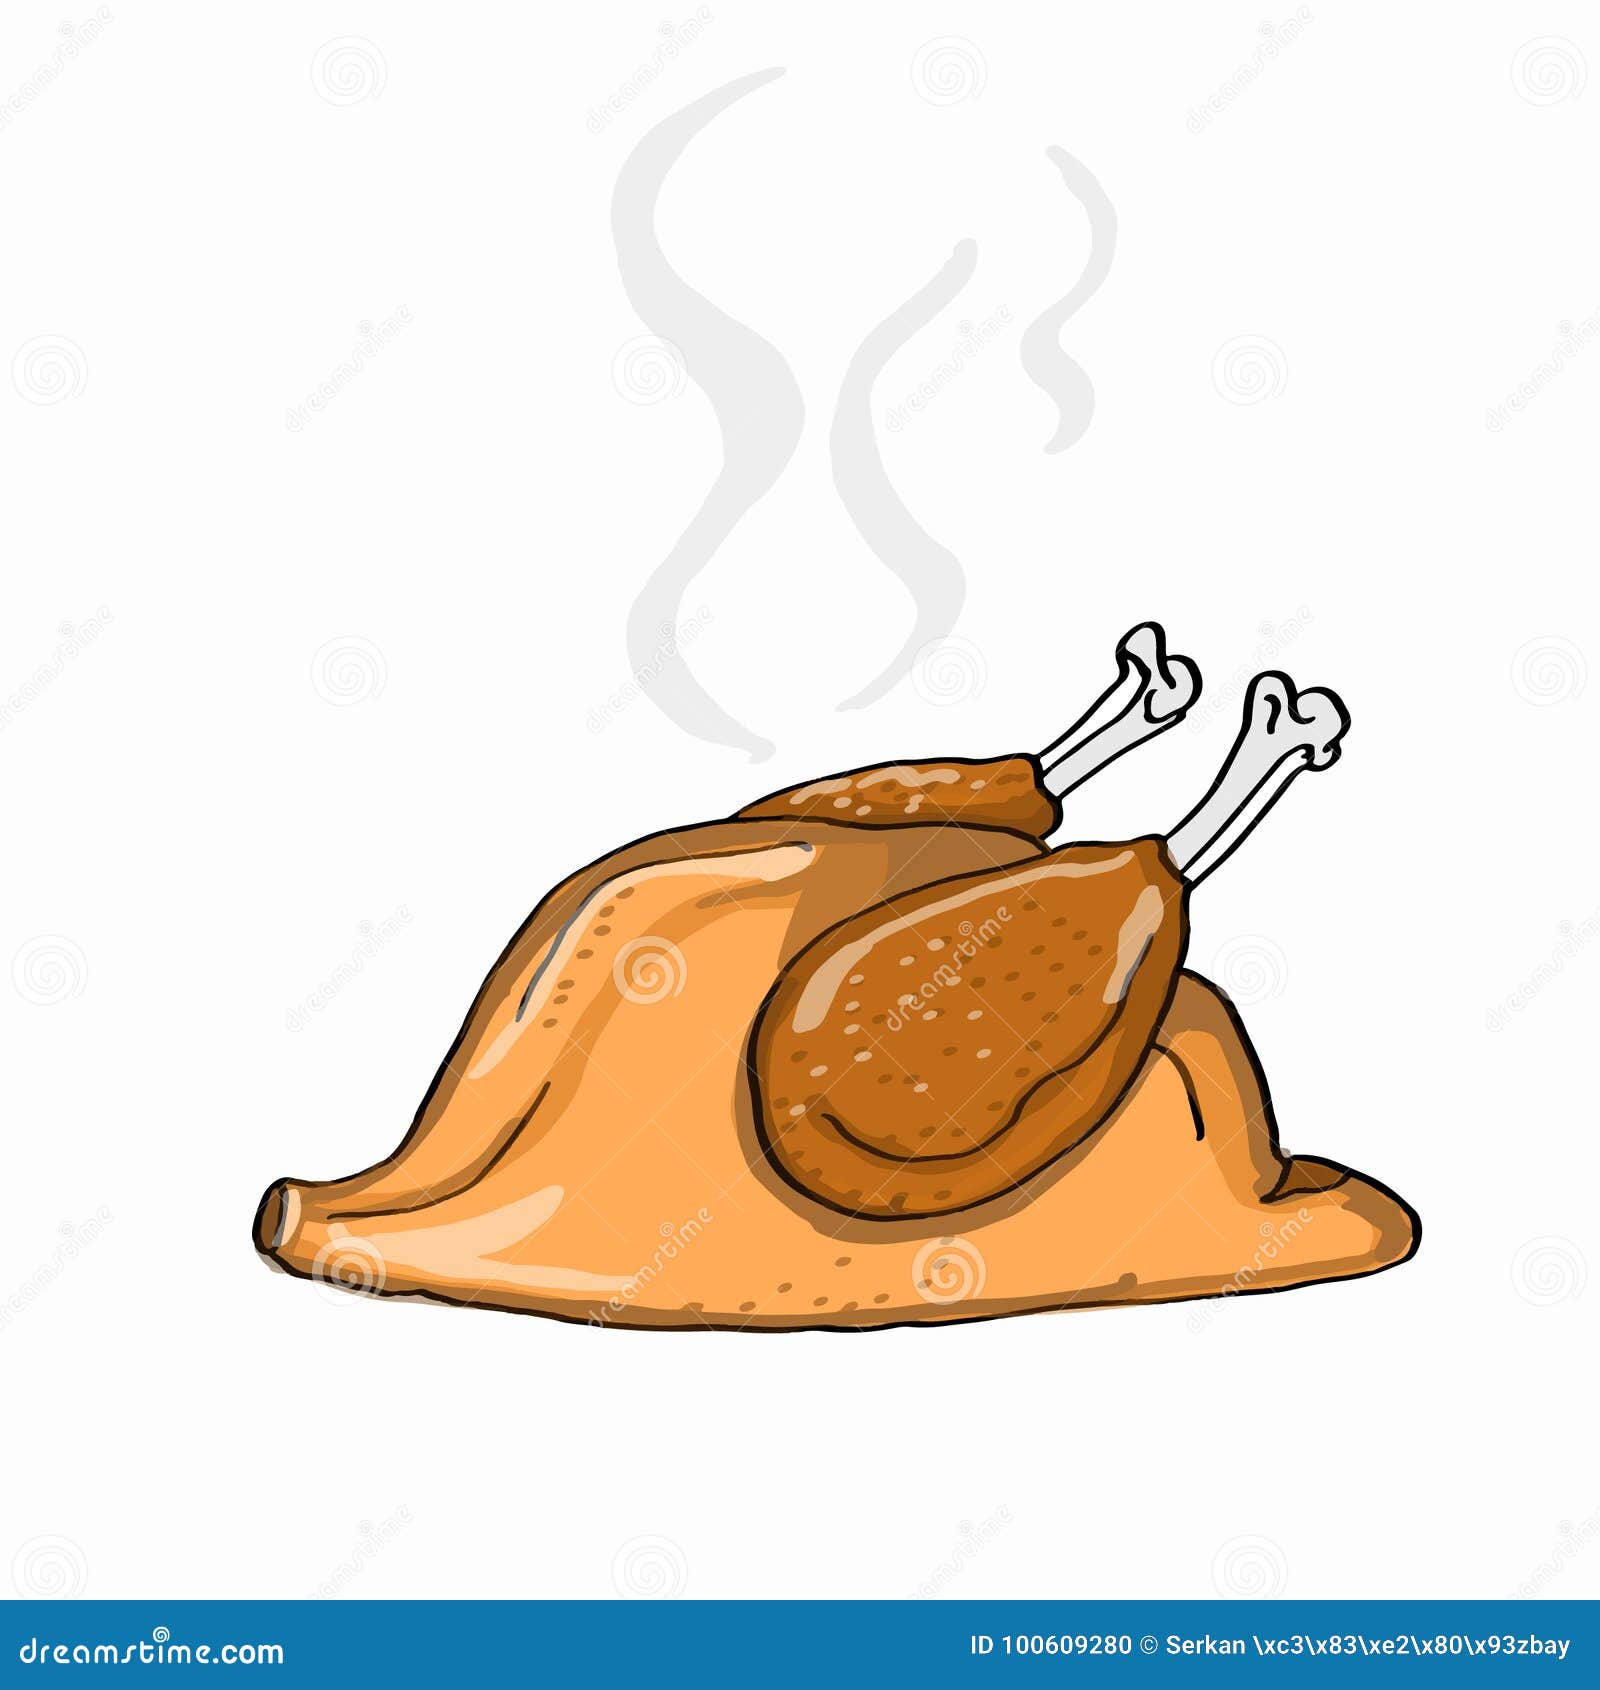 7191 Cooked Chicken Drawing Images Stock Photos  Vectors  Shutterstock